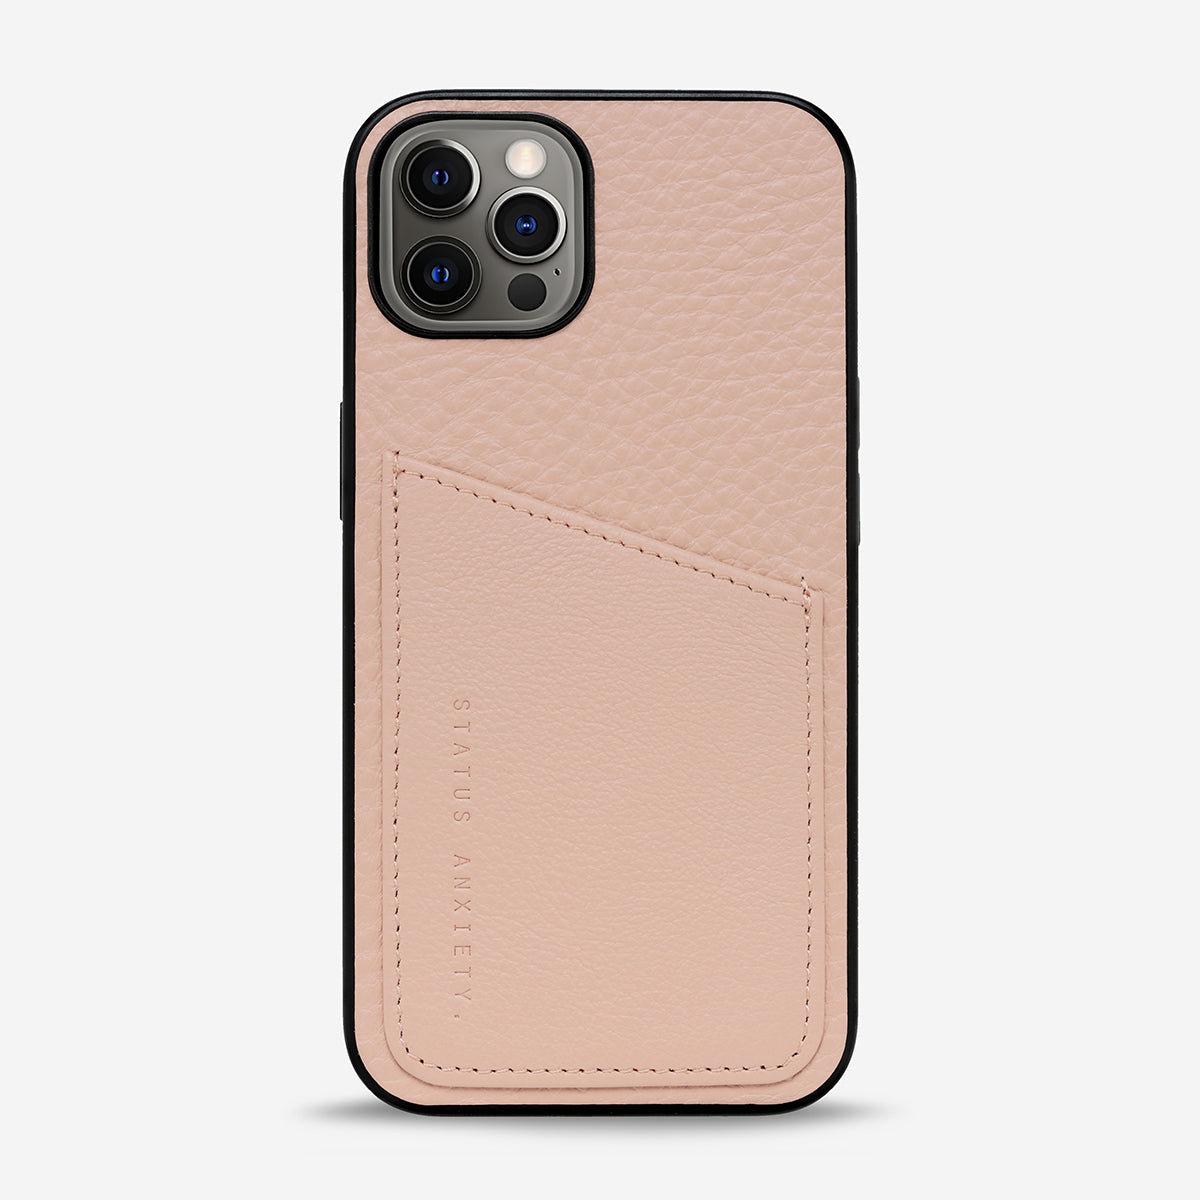 WHO'S WHO PHONE CASE - DUSTY PINK